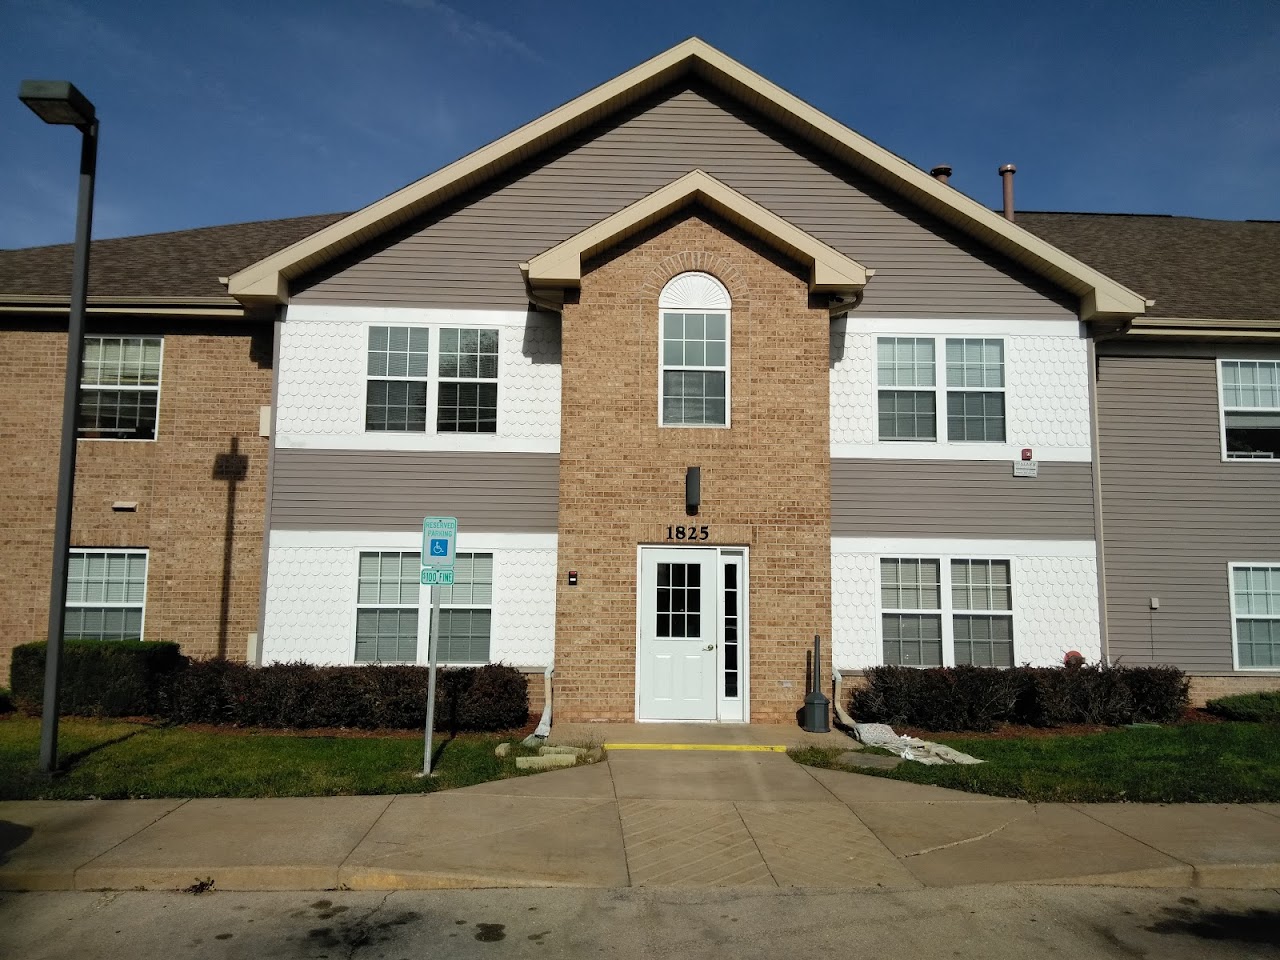 Photo of YELLOW CREEK GLEN APTS. Affordable housing located at 1825 S YELLOW CREEK CT FREEPORT, IL 61032